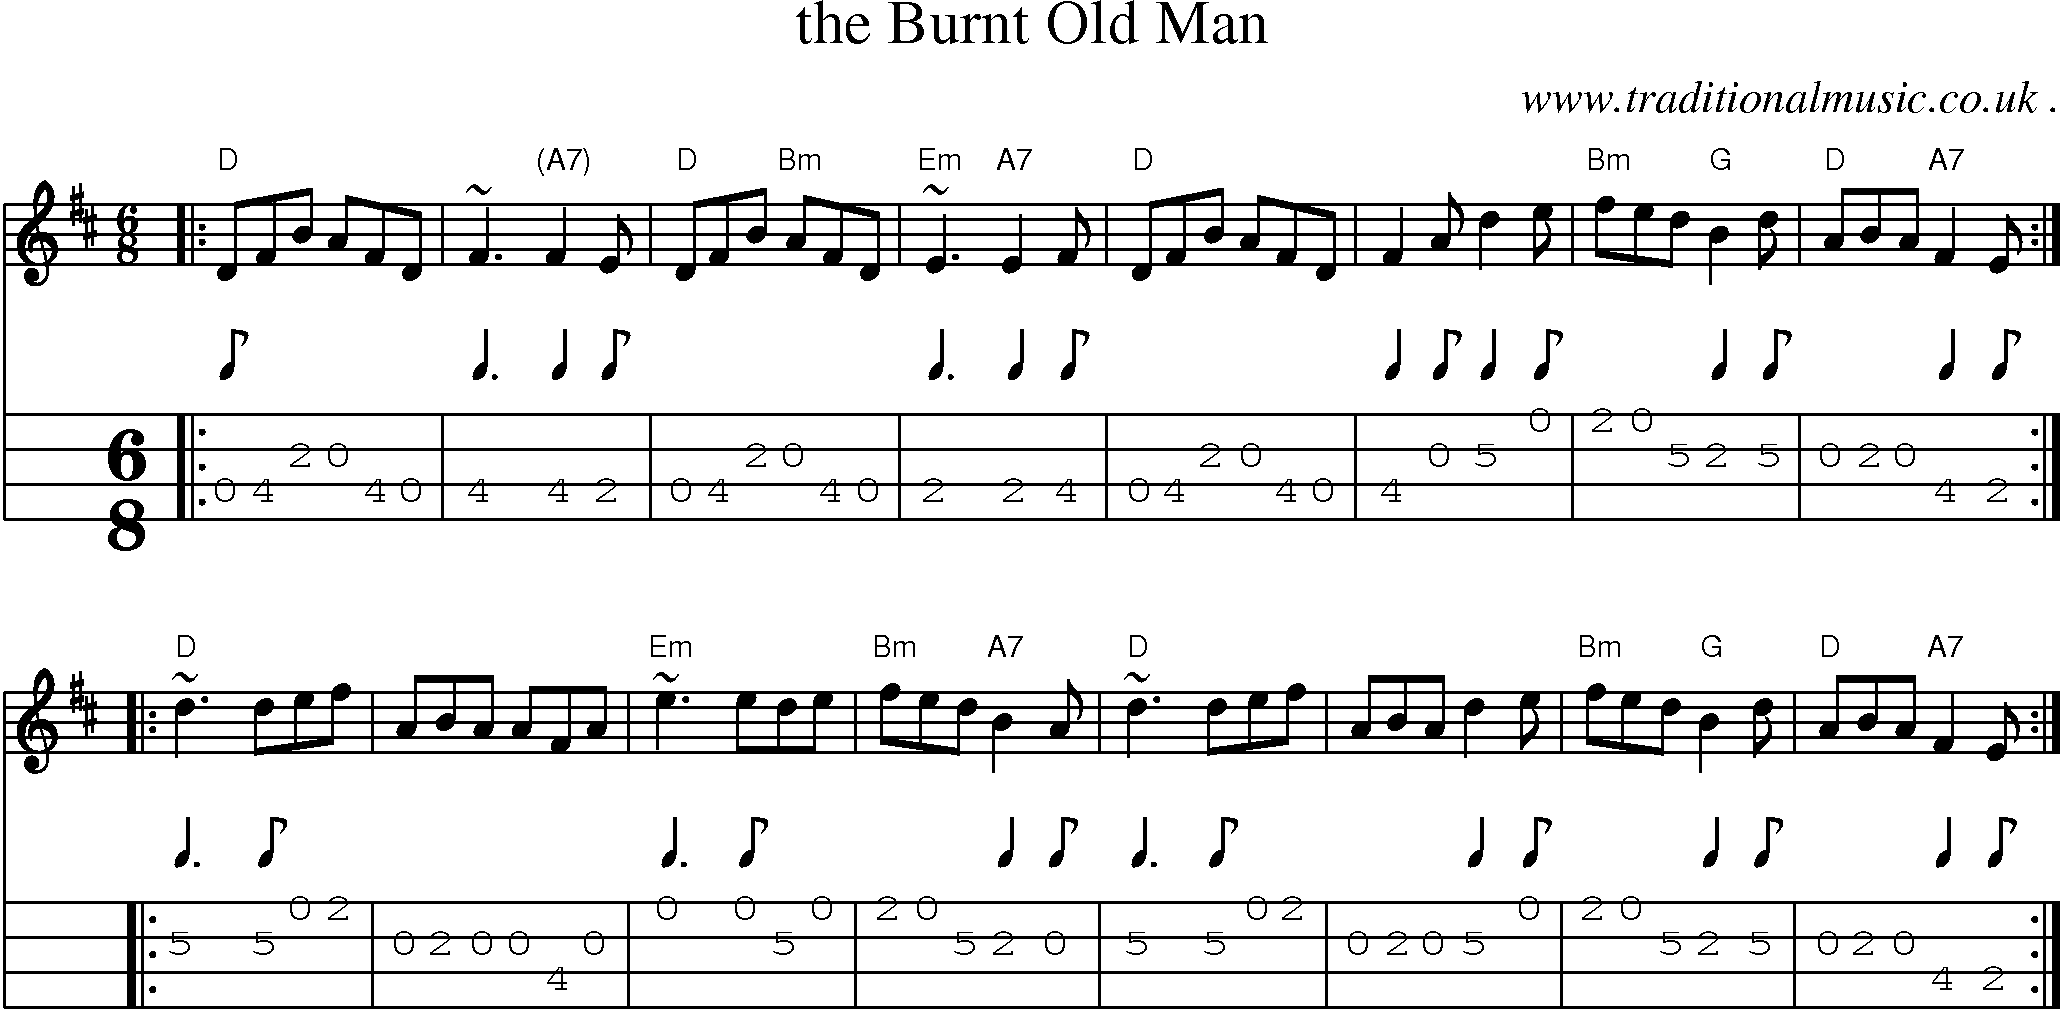 Sheet-music  score, Chords and Mandolin Tabs for The Burnt Old Man